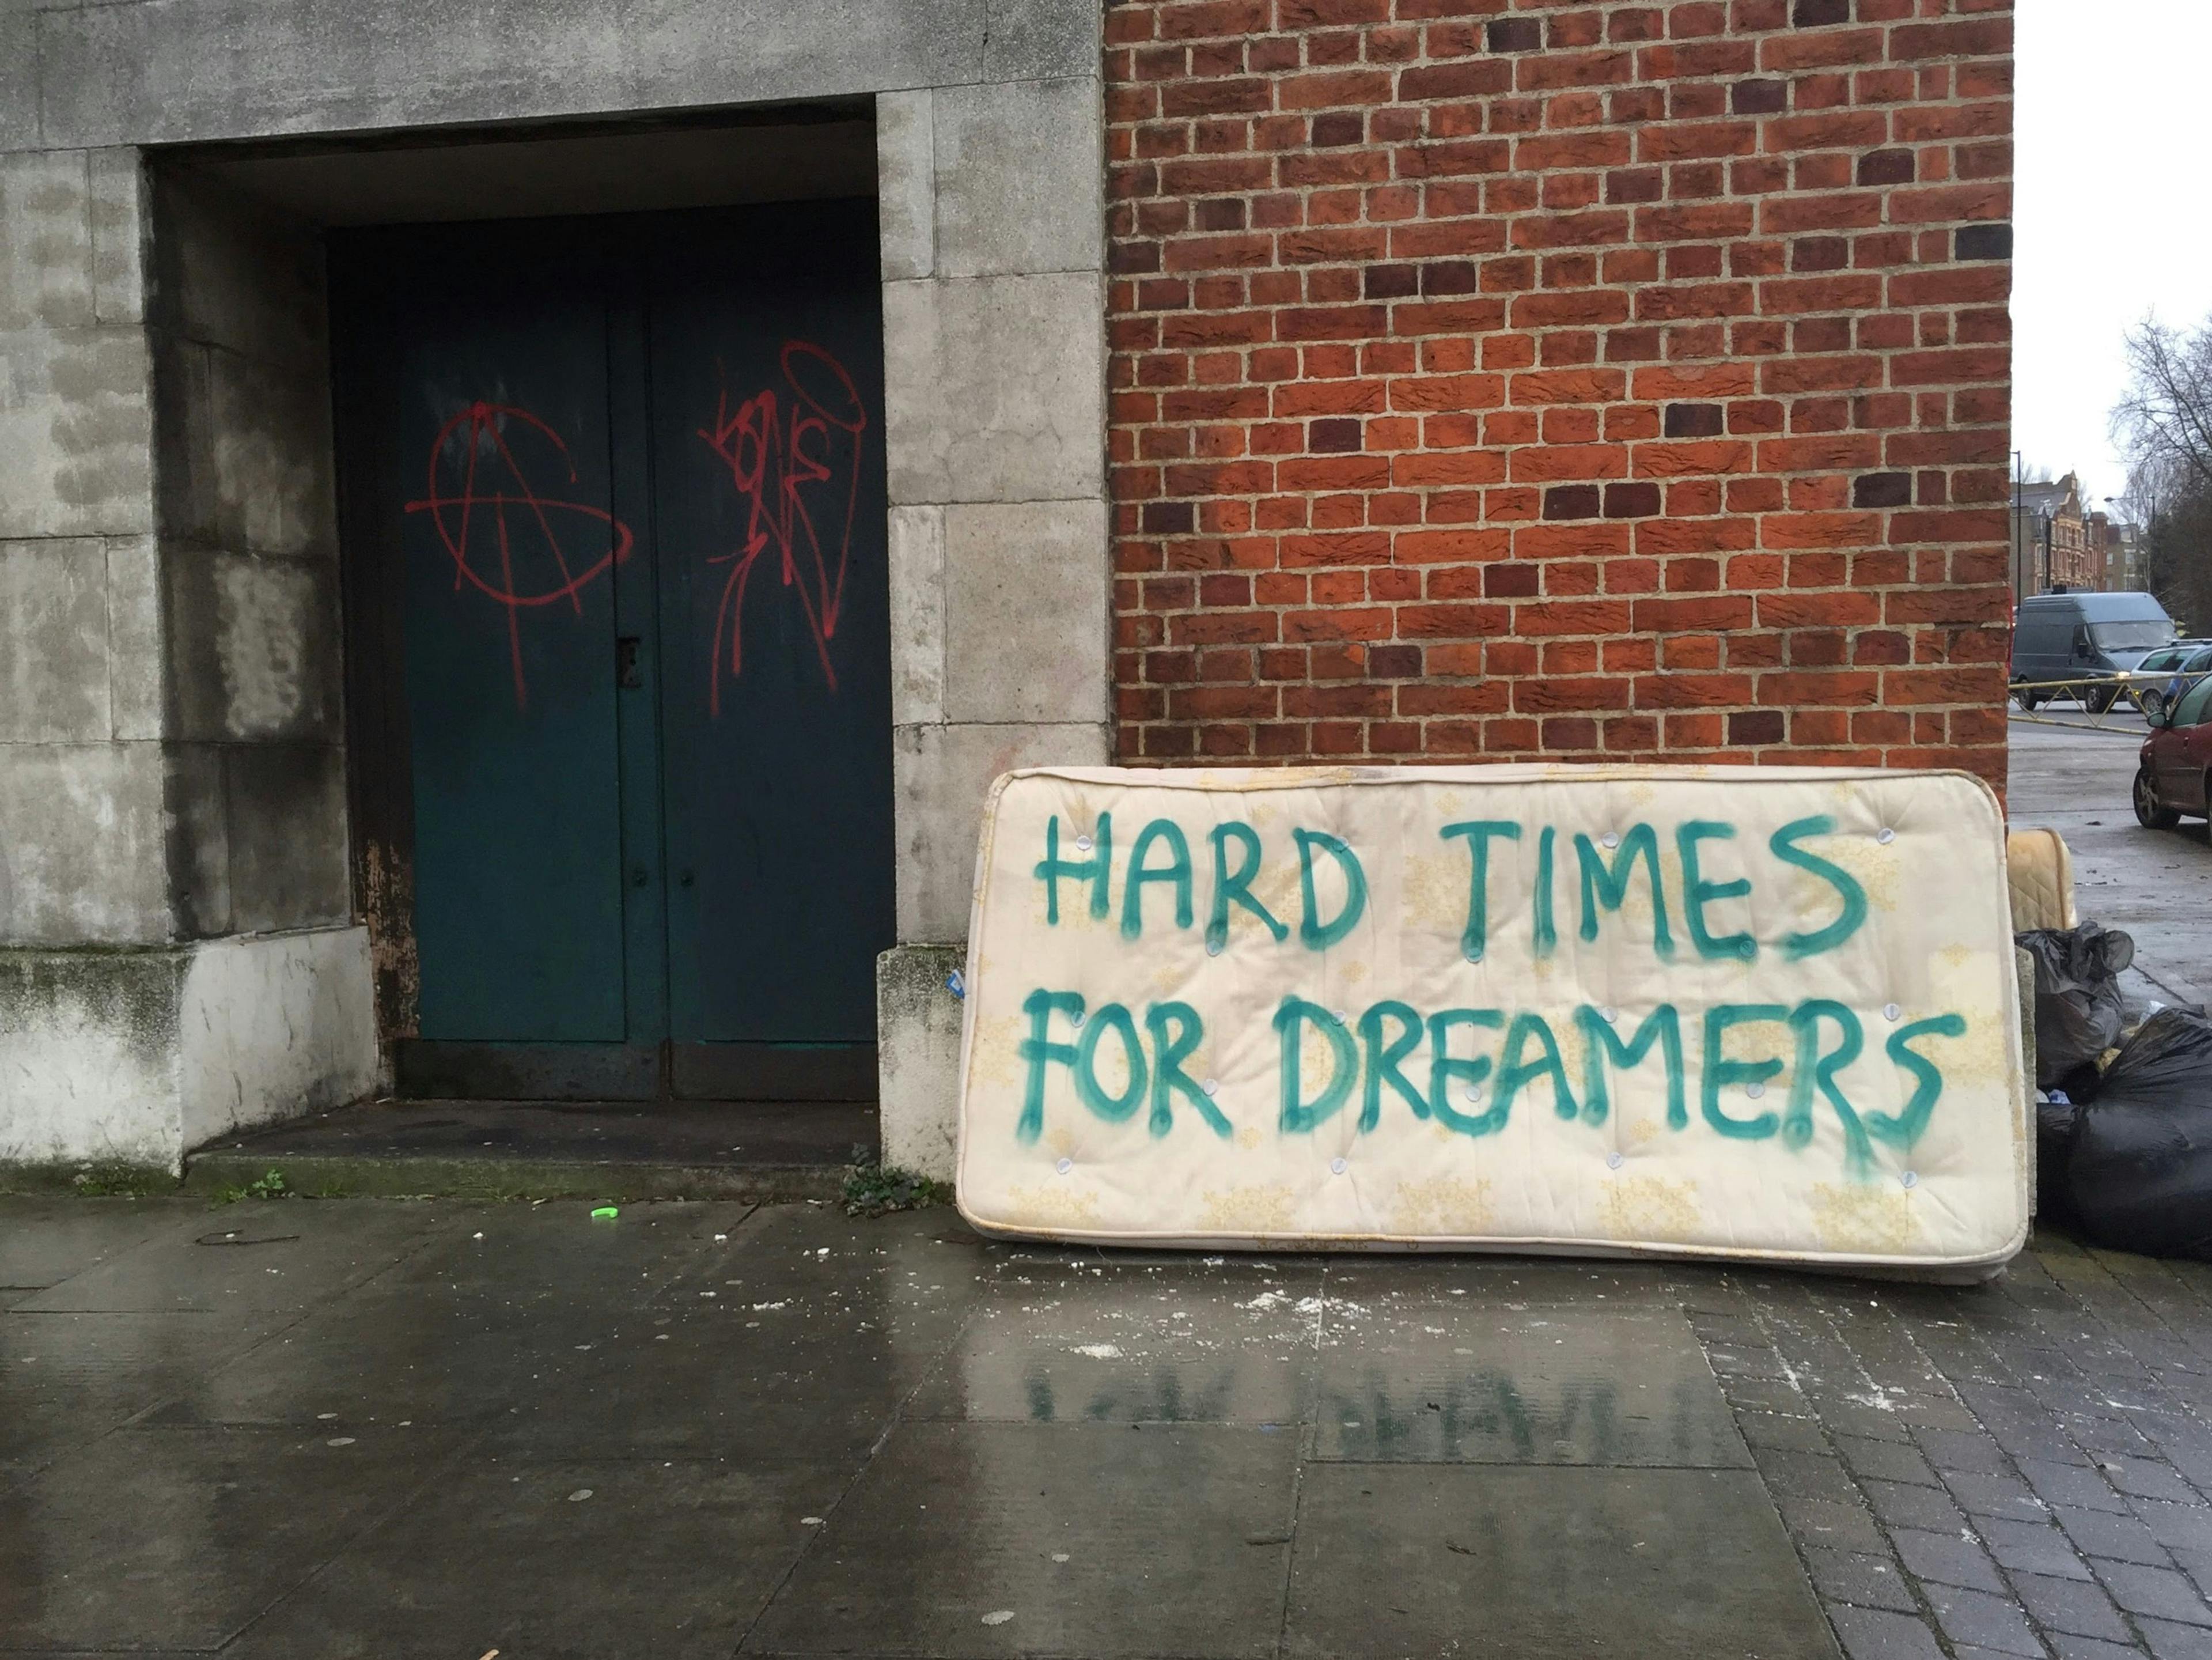 Hard times for dreamers